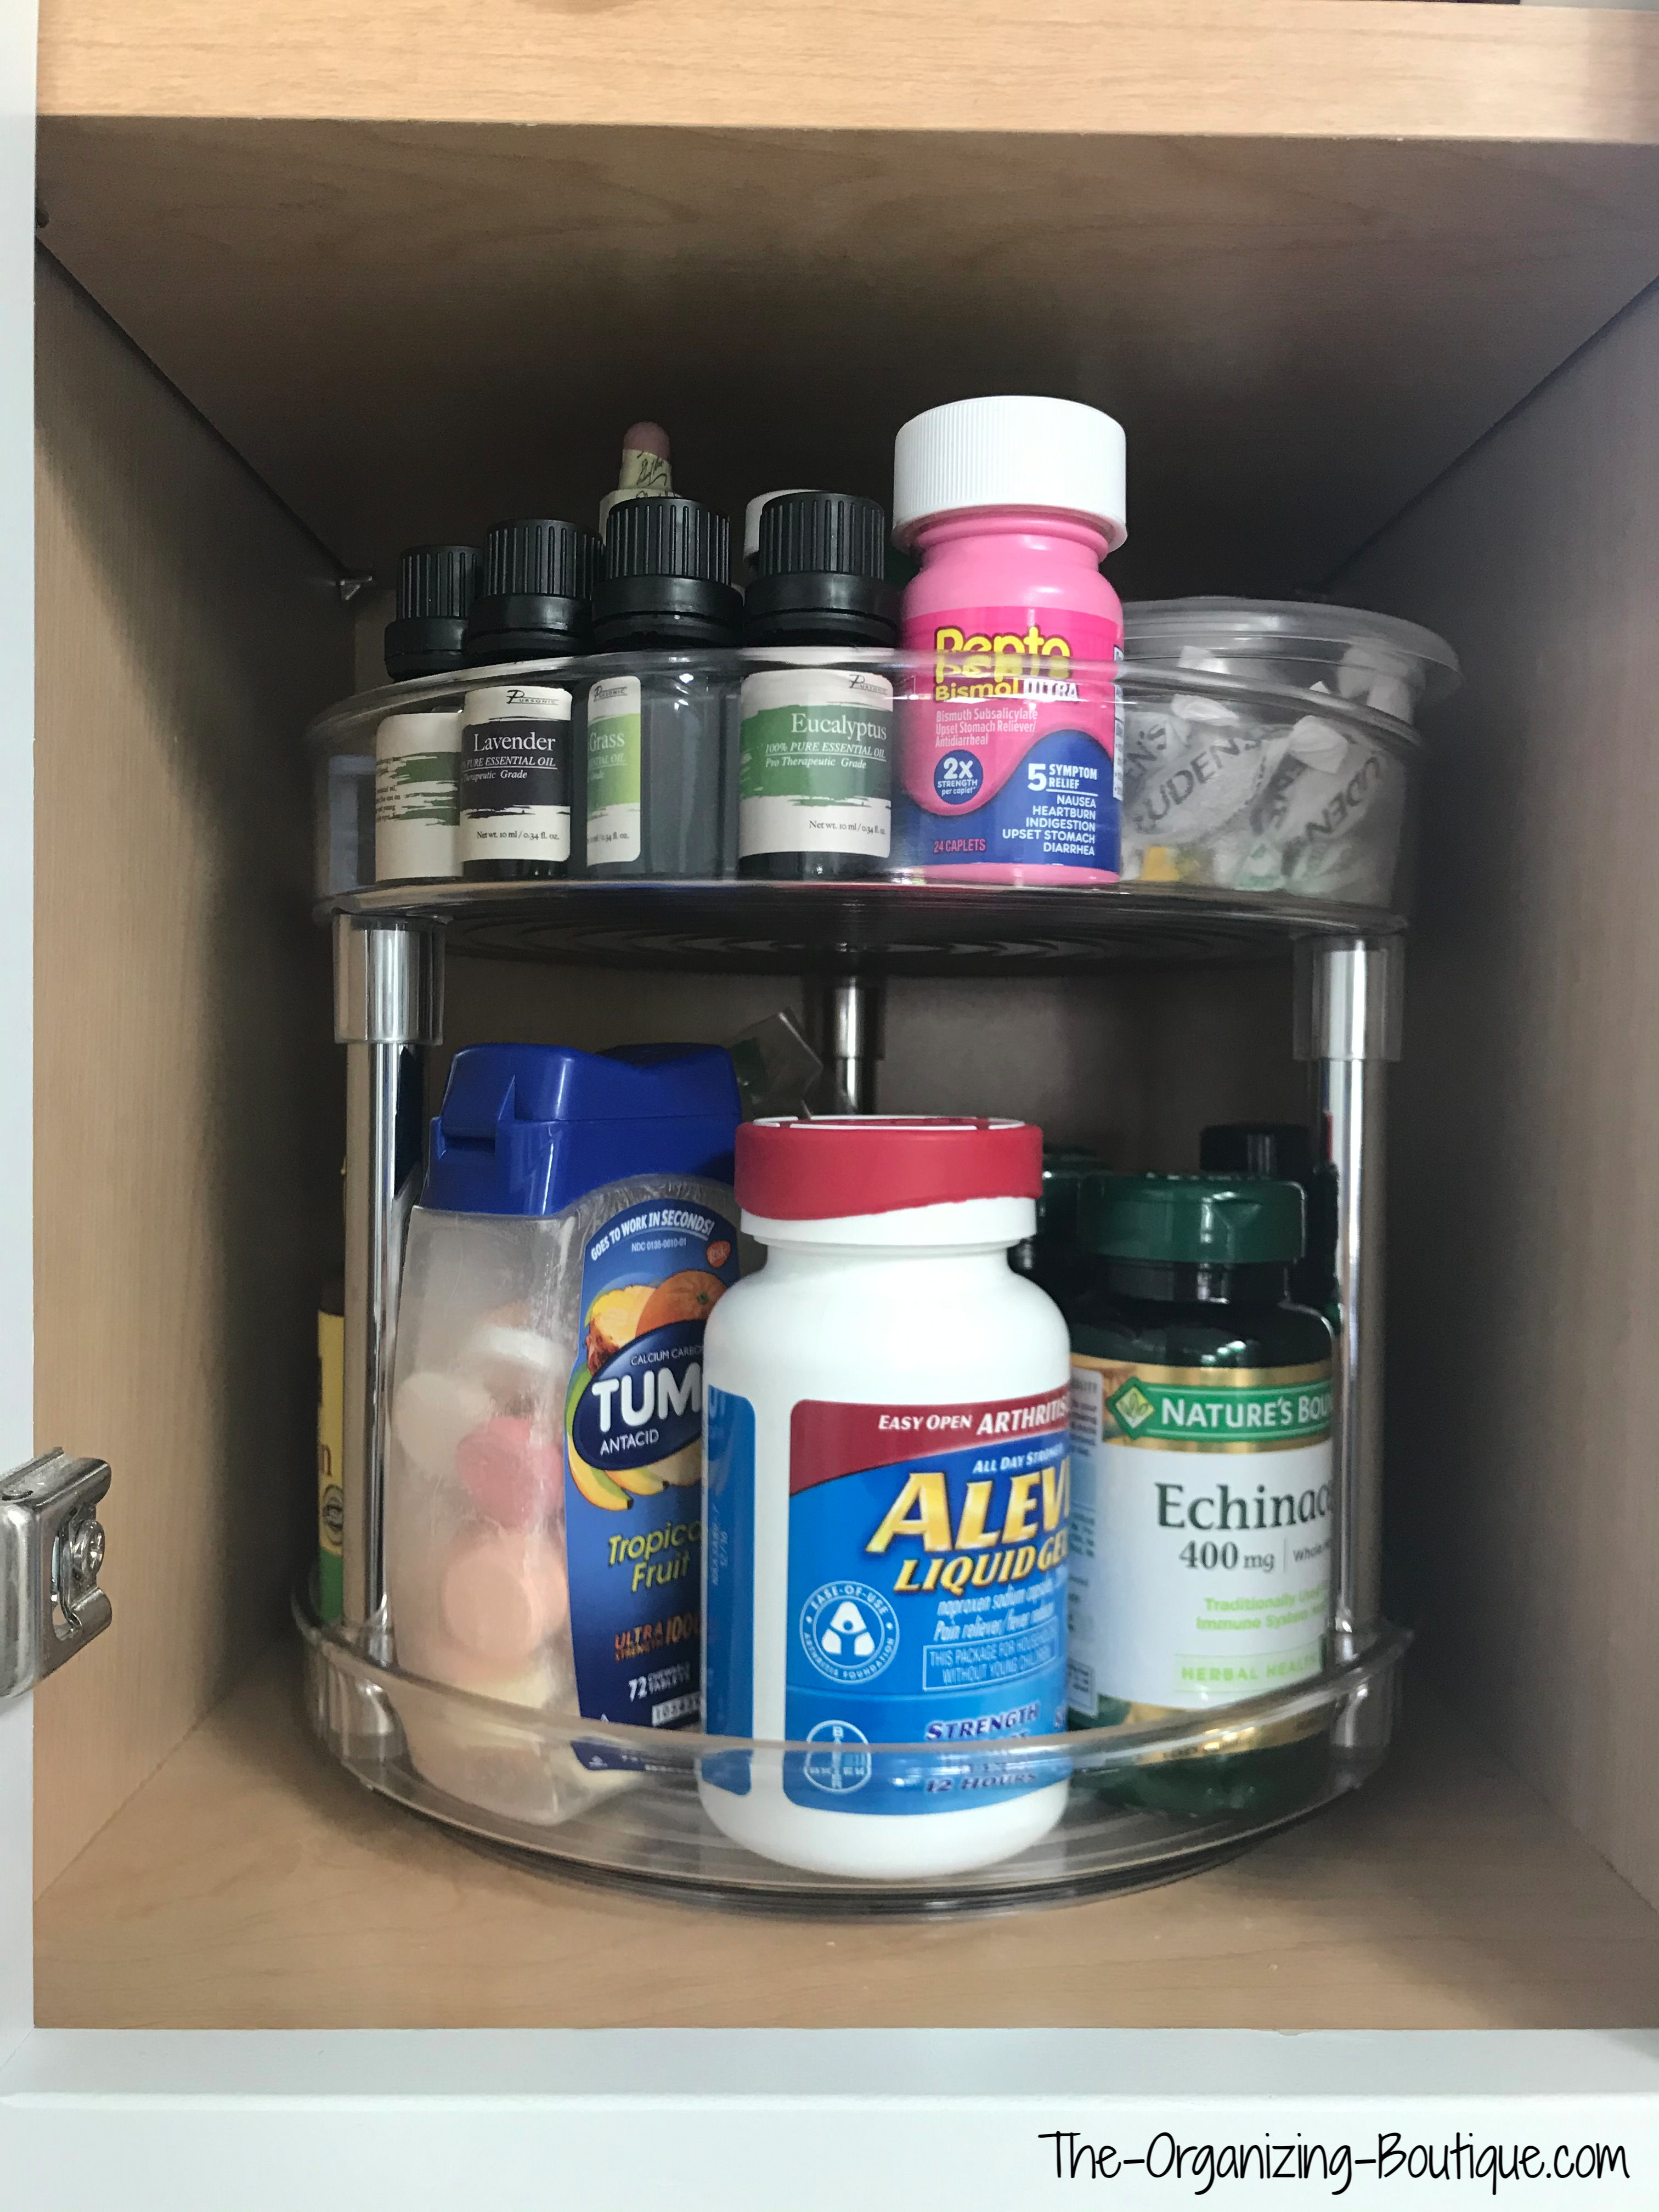 Any storage ideas for a LOT of vitamin and supplement bottles?